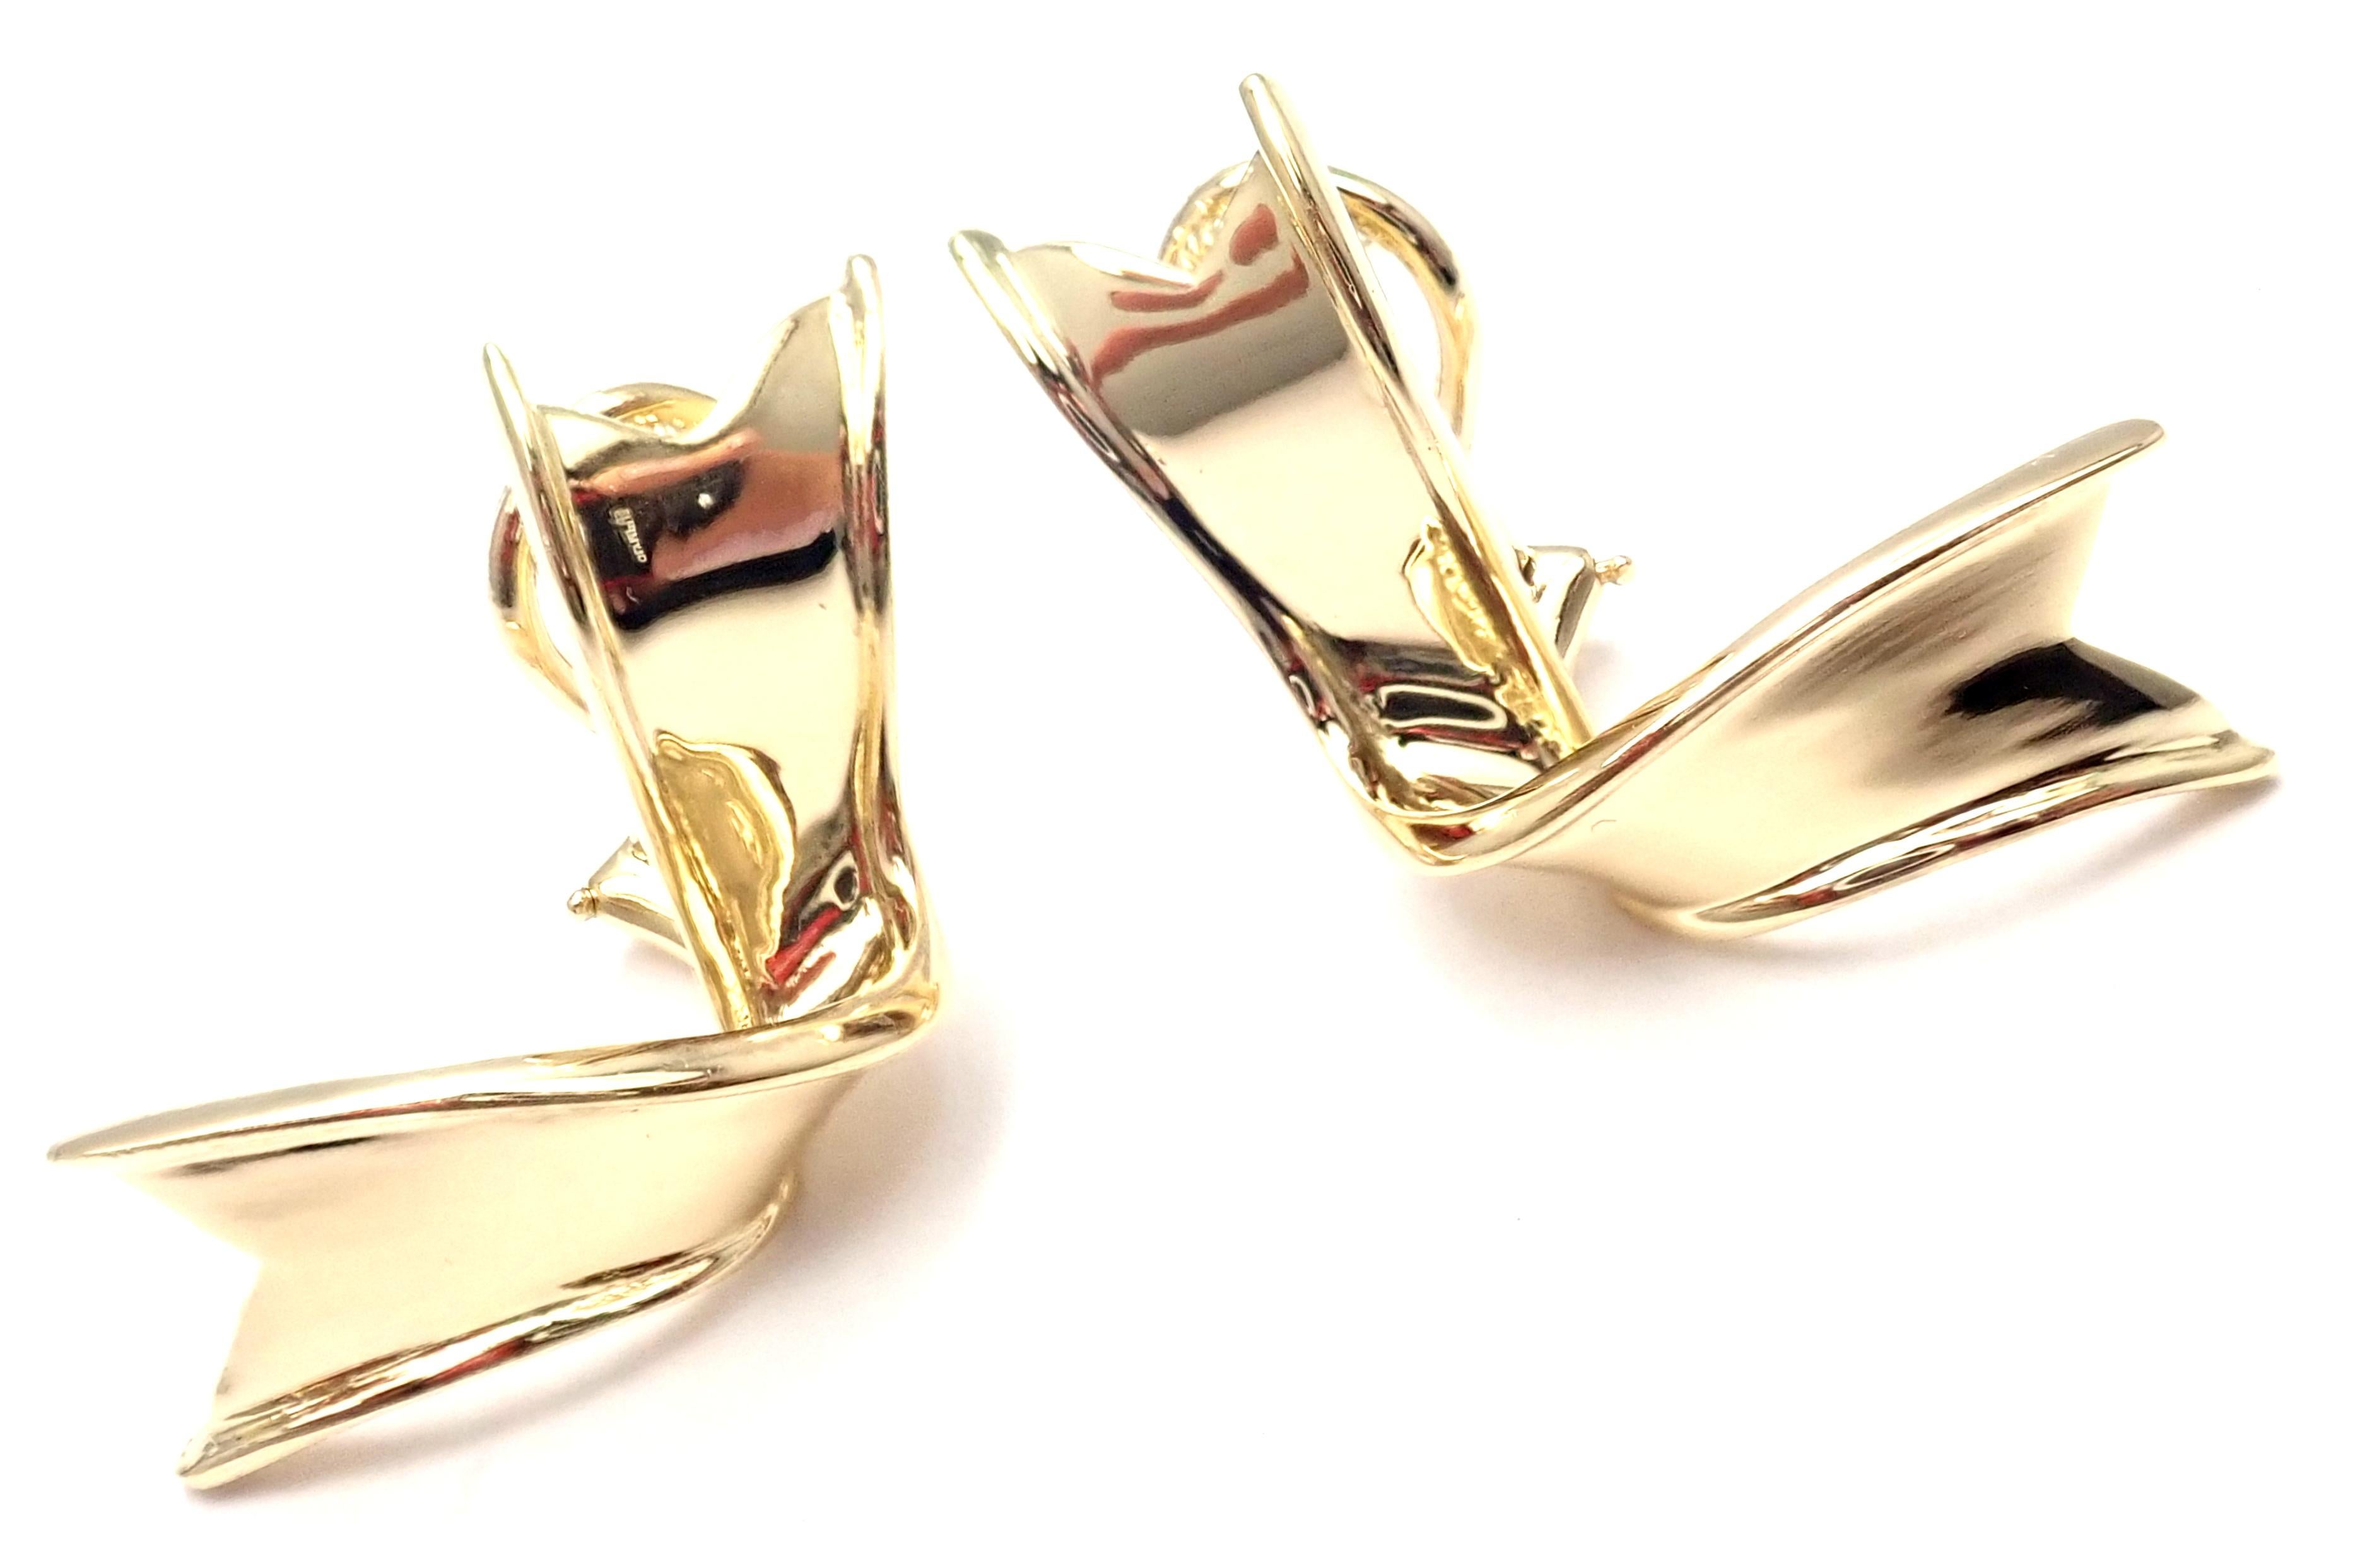 18k Yellow Gold Vintage Ribbon Earrings by Tiffany & Co.
These earrings are made for pierced ears.
Details:
Weight: 9.9 grams
Dimensions: 33mm x 16mm
Stamped Hallmarks: T&Co 750 18k 1988
*Free Shipping within the United States*
YOUR PRICE: